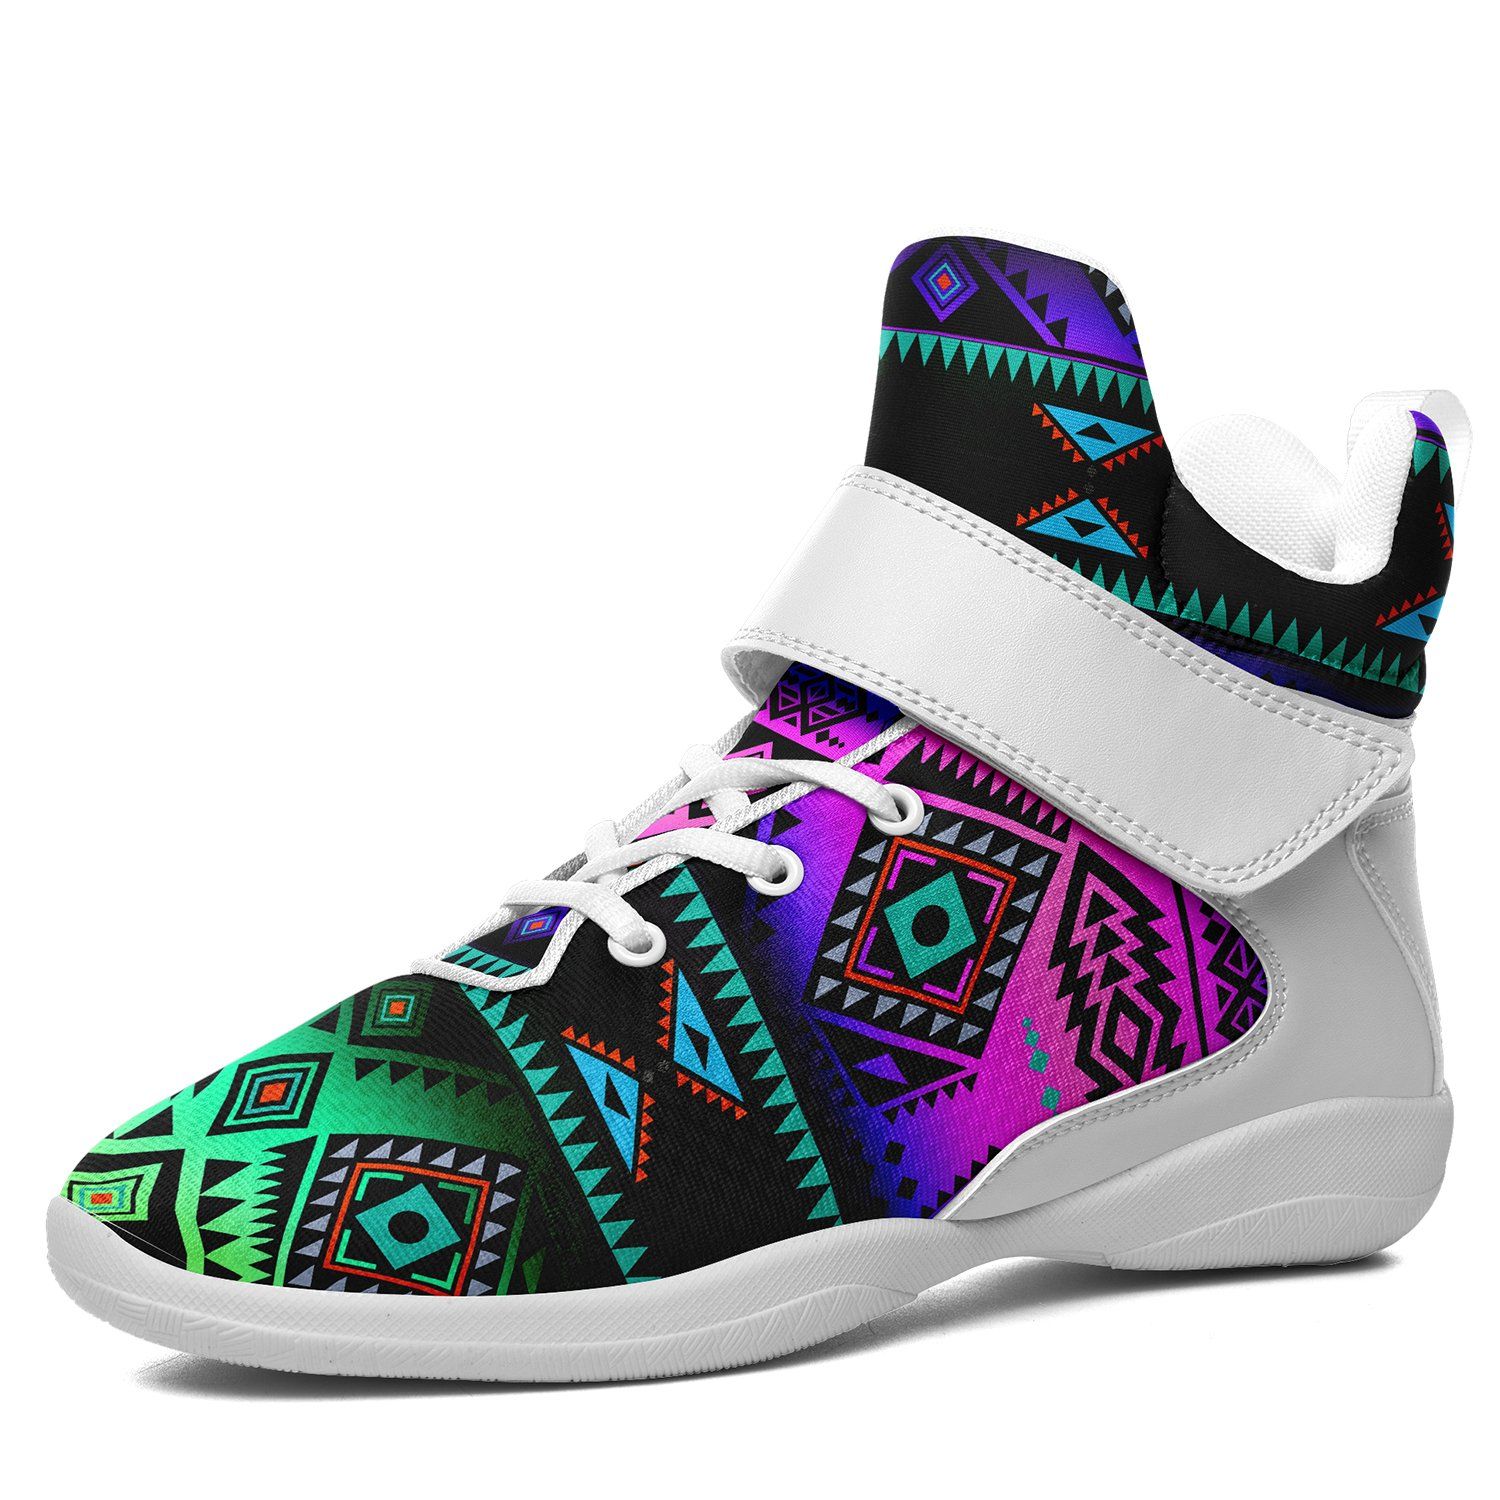 California Coast Sunrise Ipottaa Basketball / Sport High Top Shoes 49 Dzine US Women 4.5 / US Youth 3.5 / EUR 35 White Sole with White Strap 